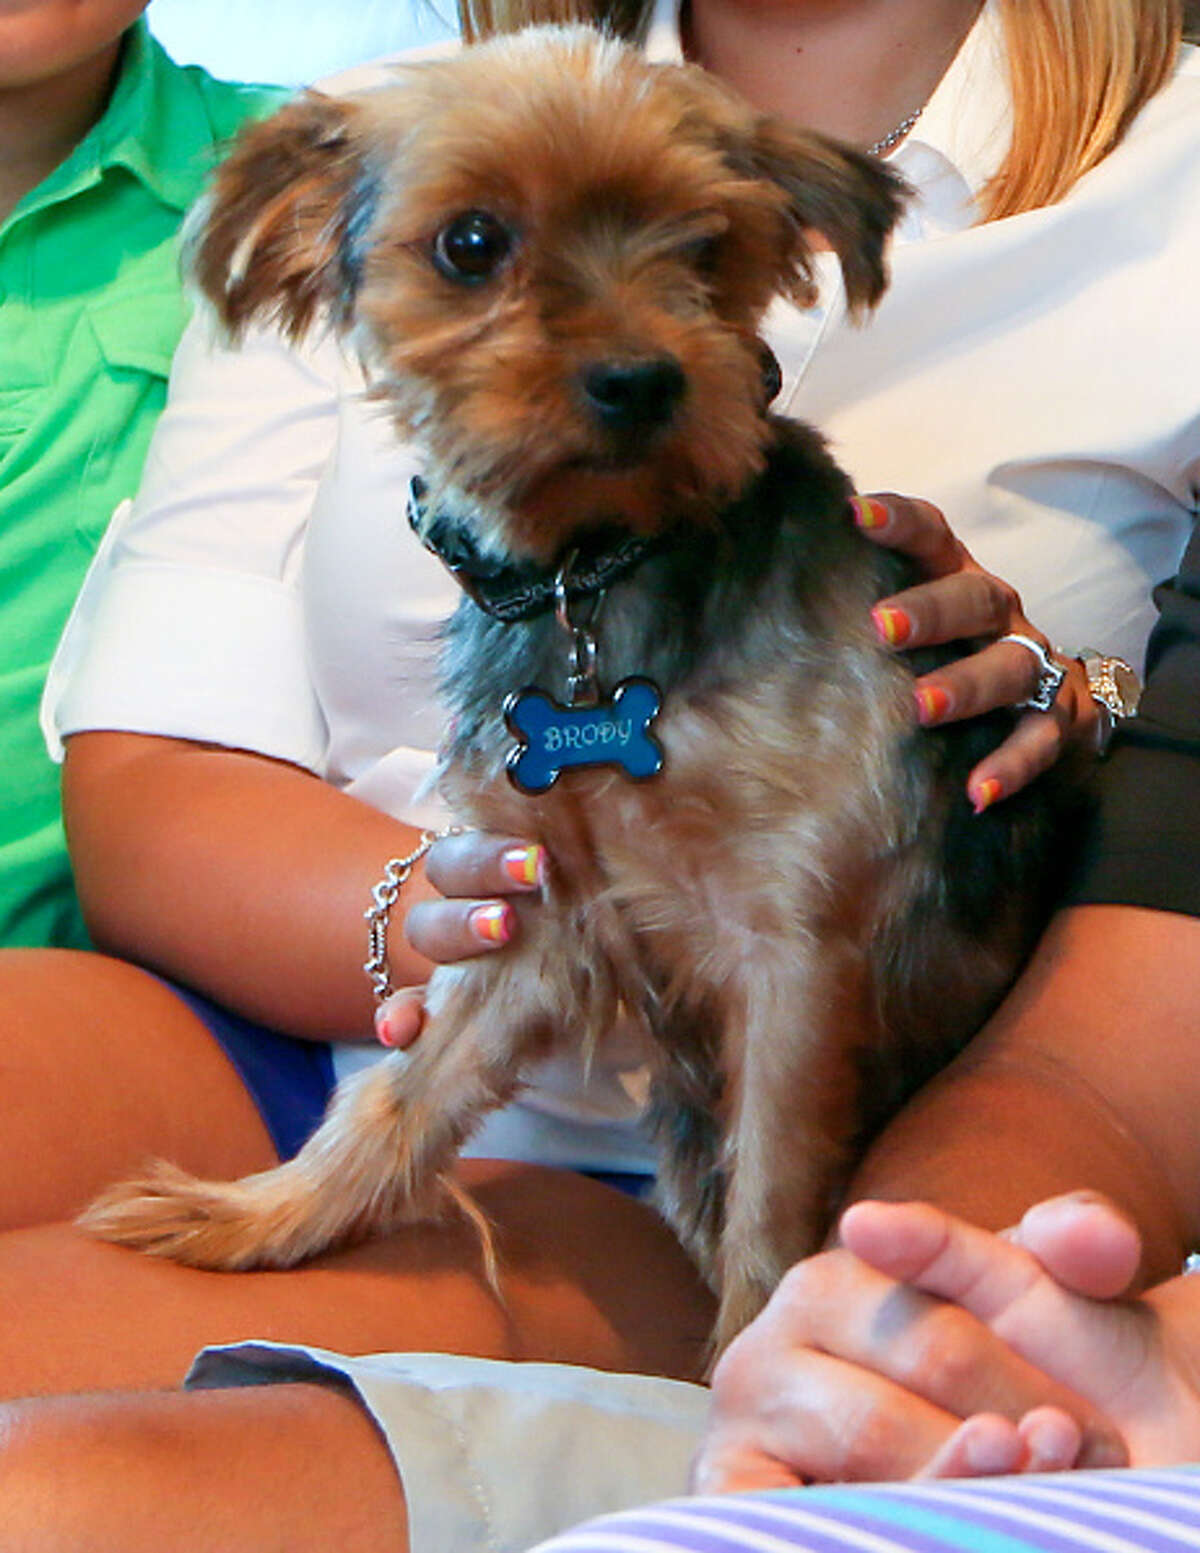 Brody, a 6-year-old Yorkshire Terrier, was returned to the Delgado family of San Antonio after he was picked up by Animal Care Services on July 16. He was missing for sixteen months.